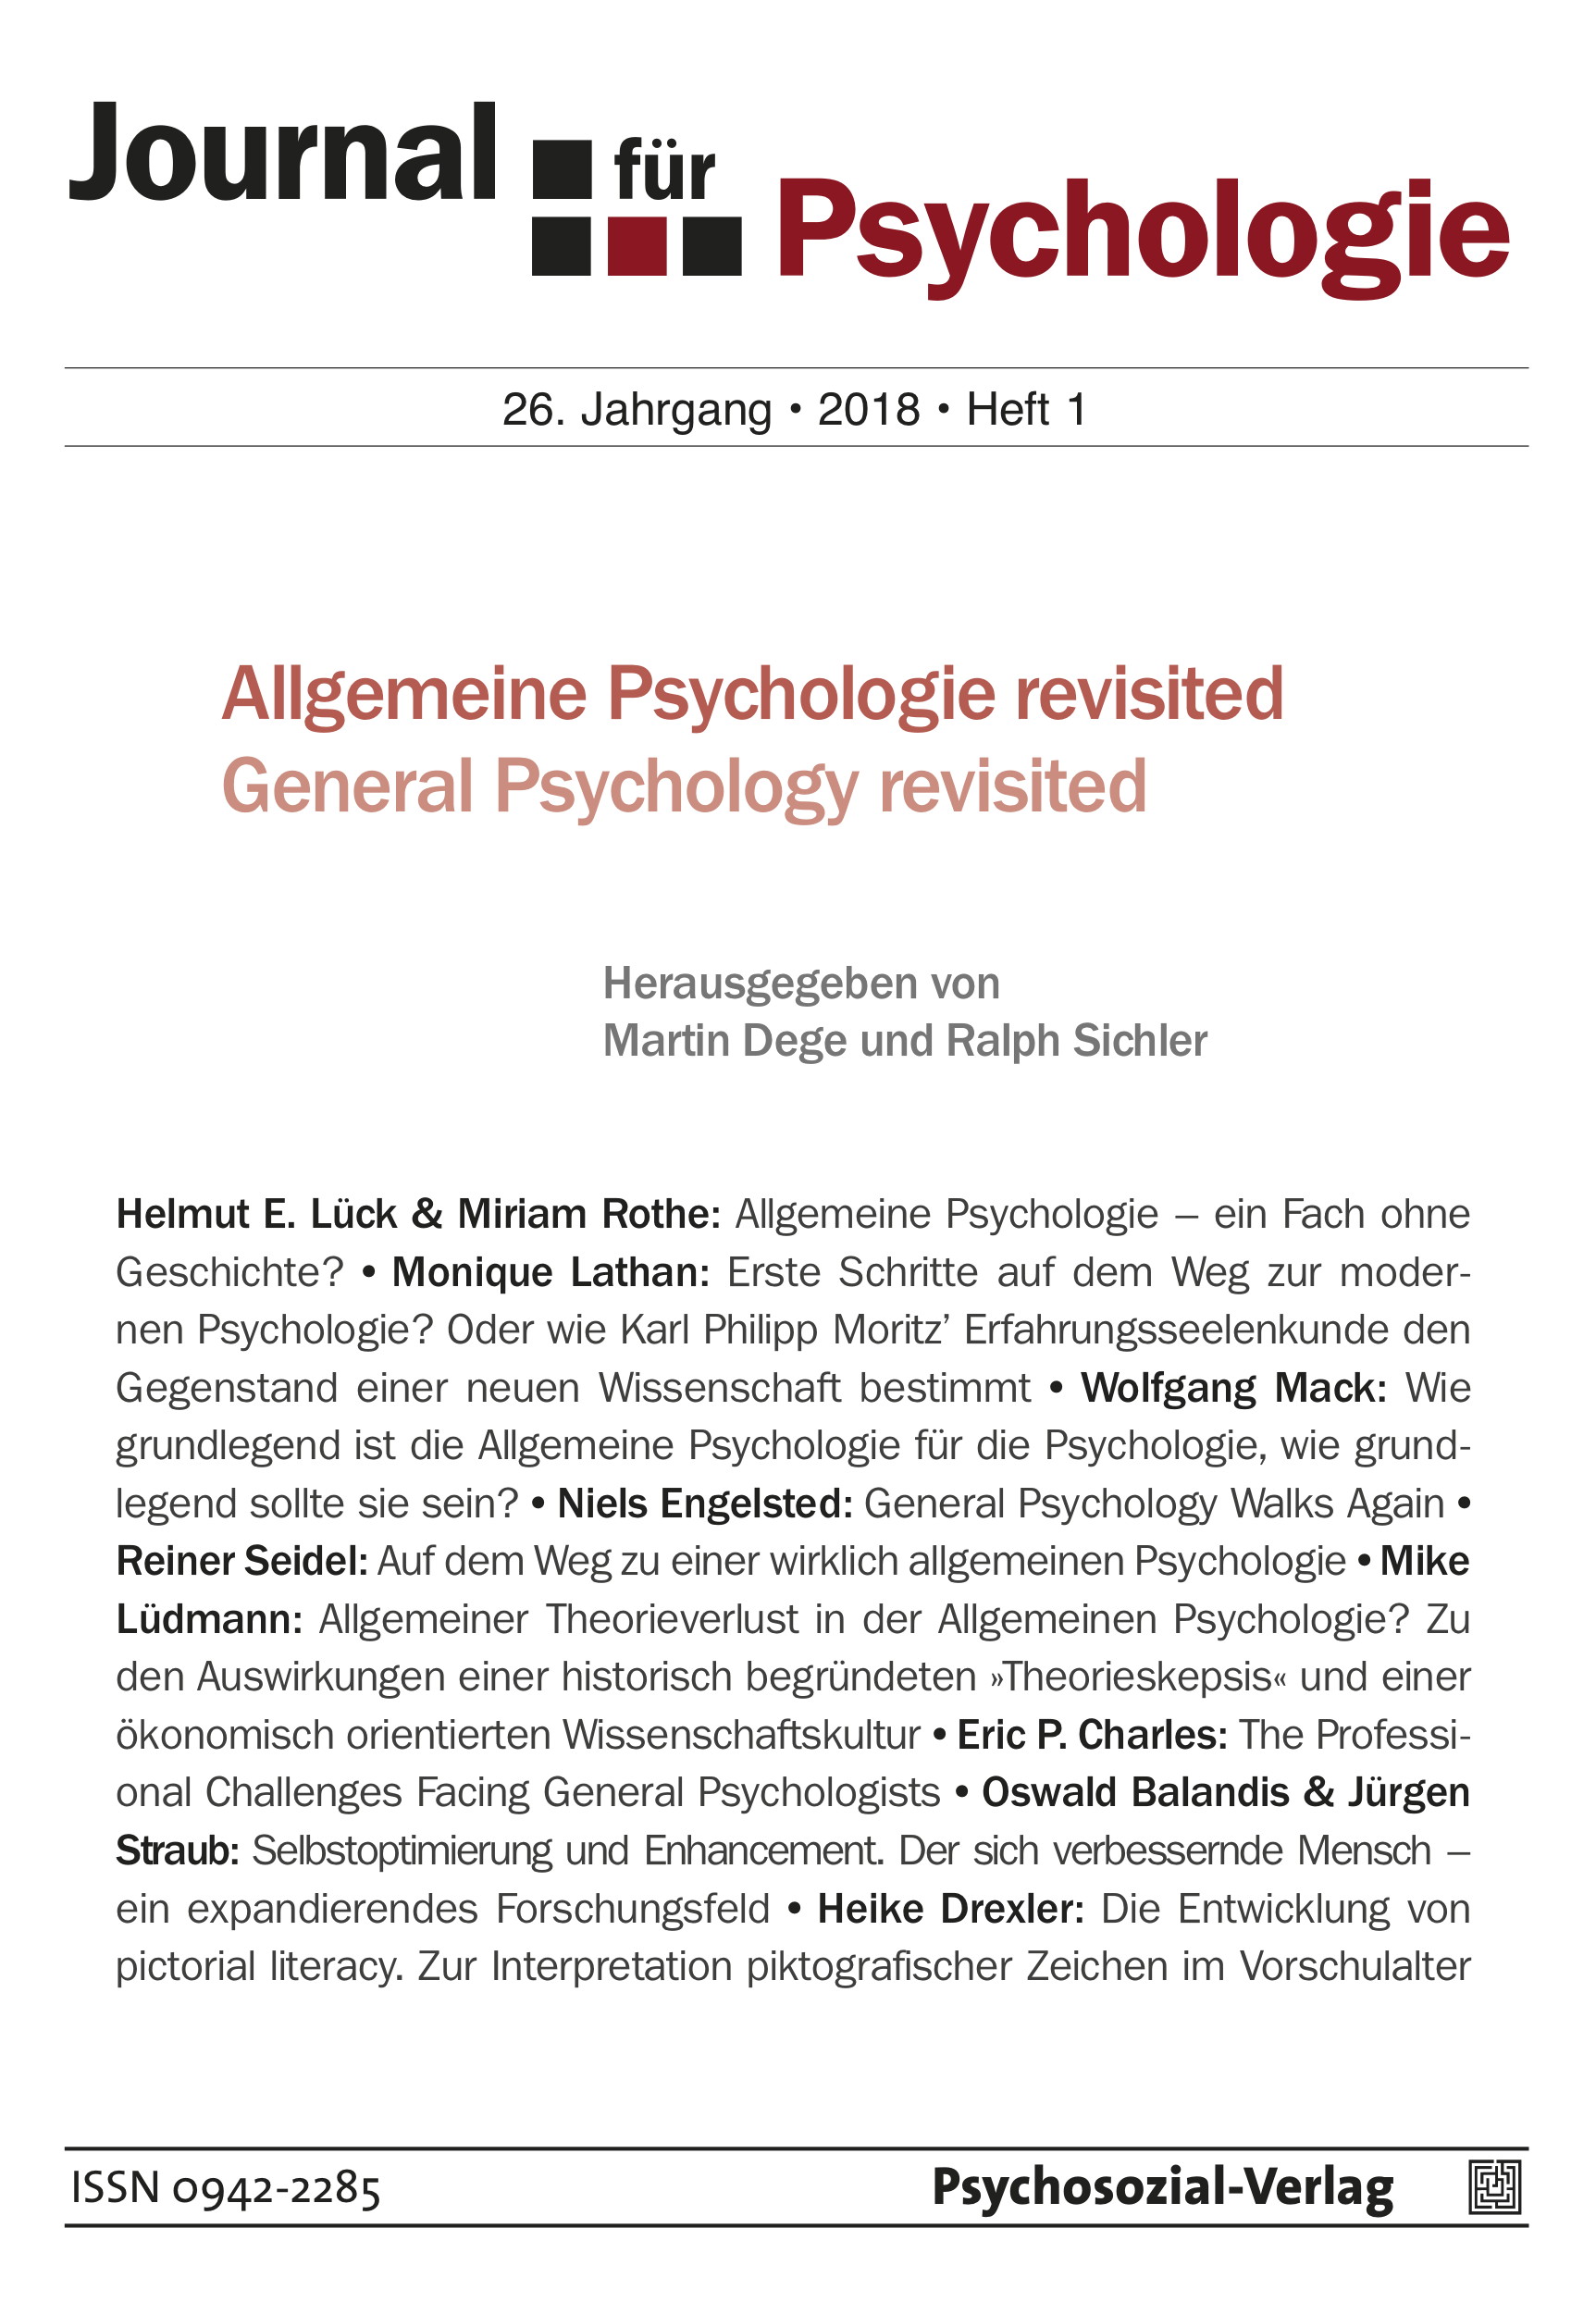 					View Vol. 26 No. 1 (2018): General Psychology revisited
				